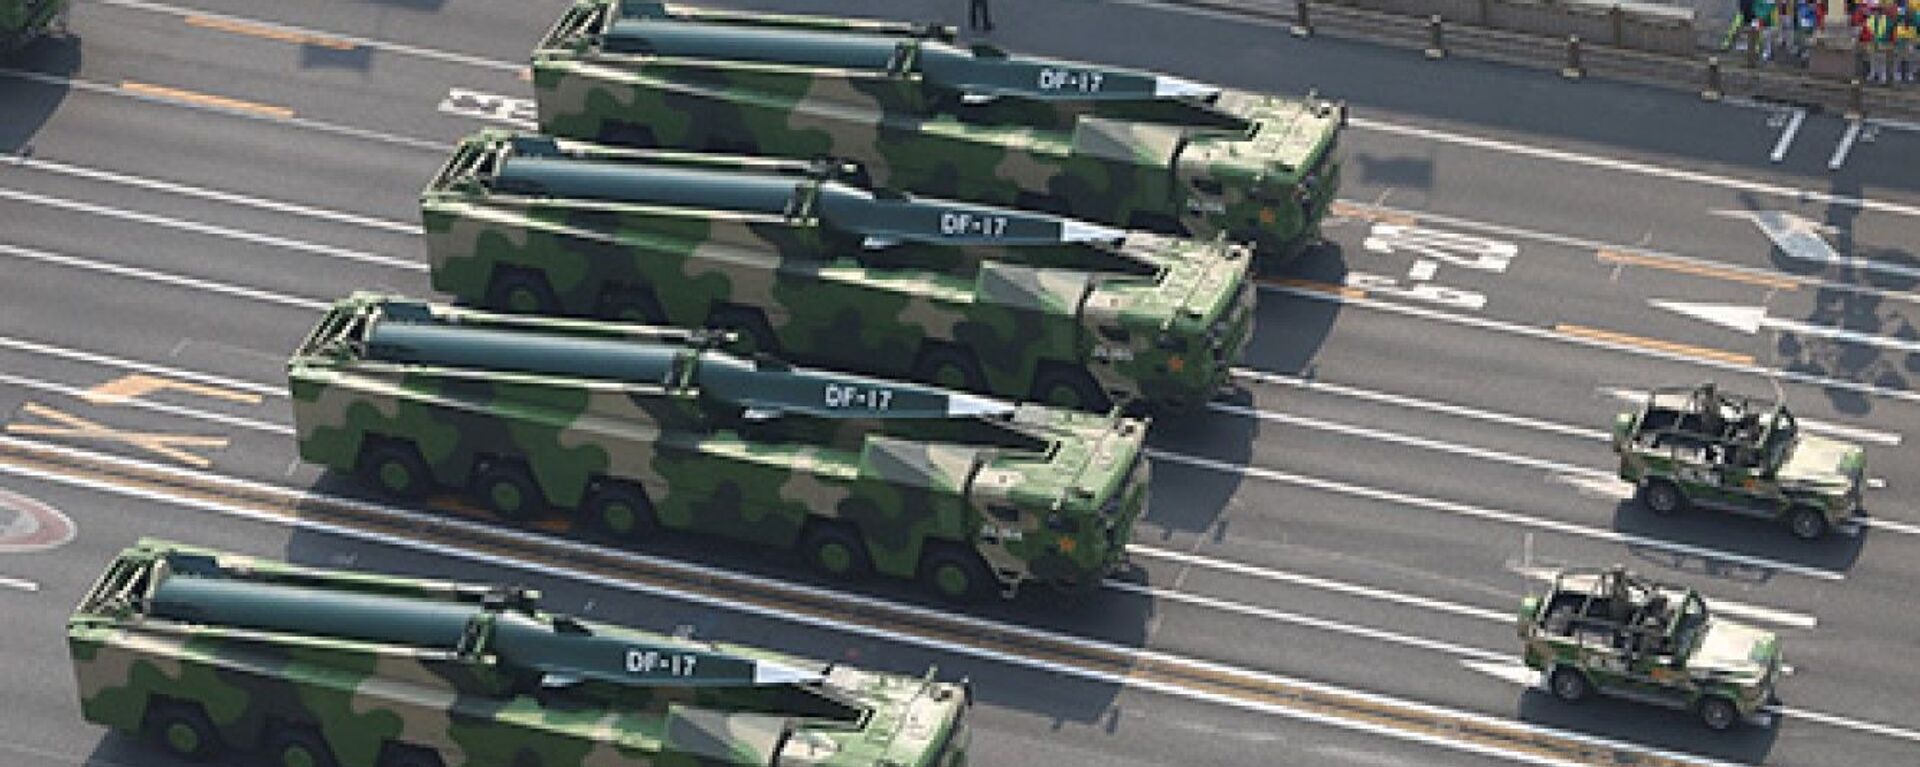 Making their debut in the general public for the first time, DF-17 hypersonic missiles join China's National Day parade held in Beijing on October 1, 2019 - Sputnik International, 1920, 17.10.2021